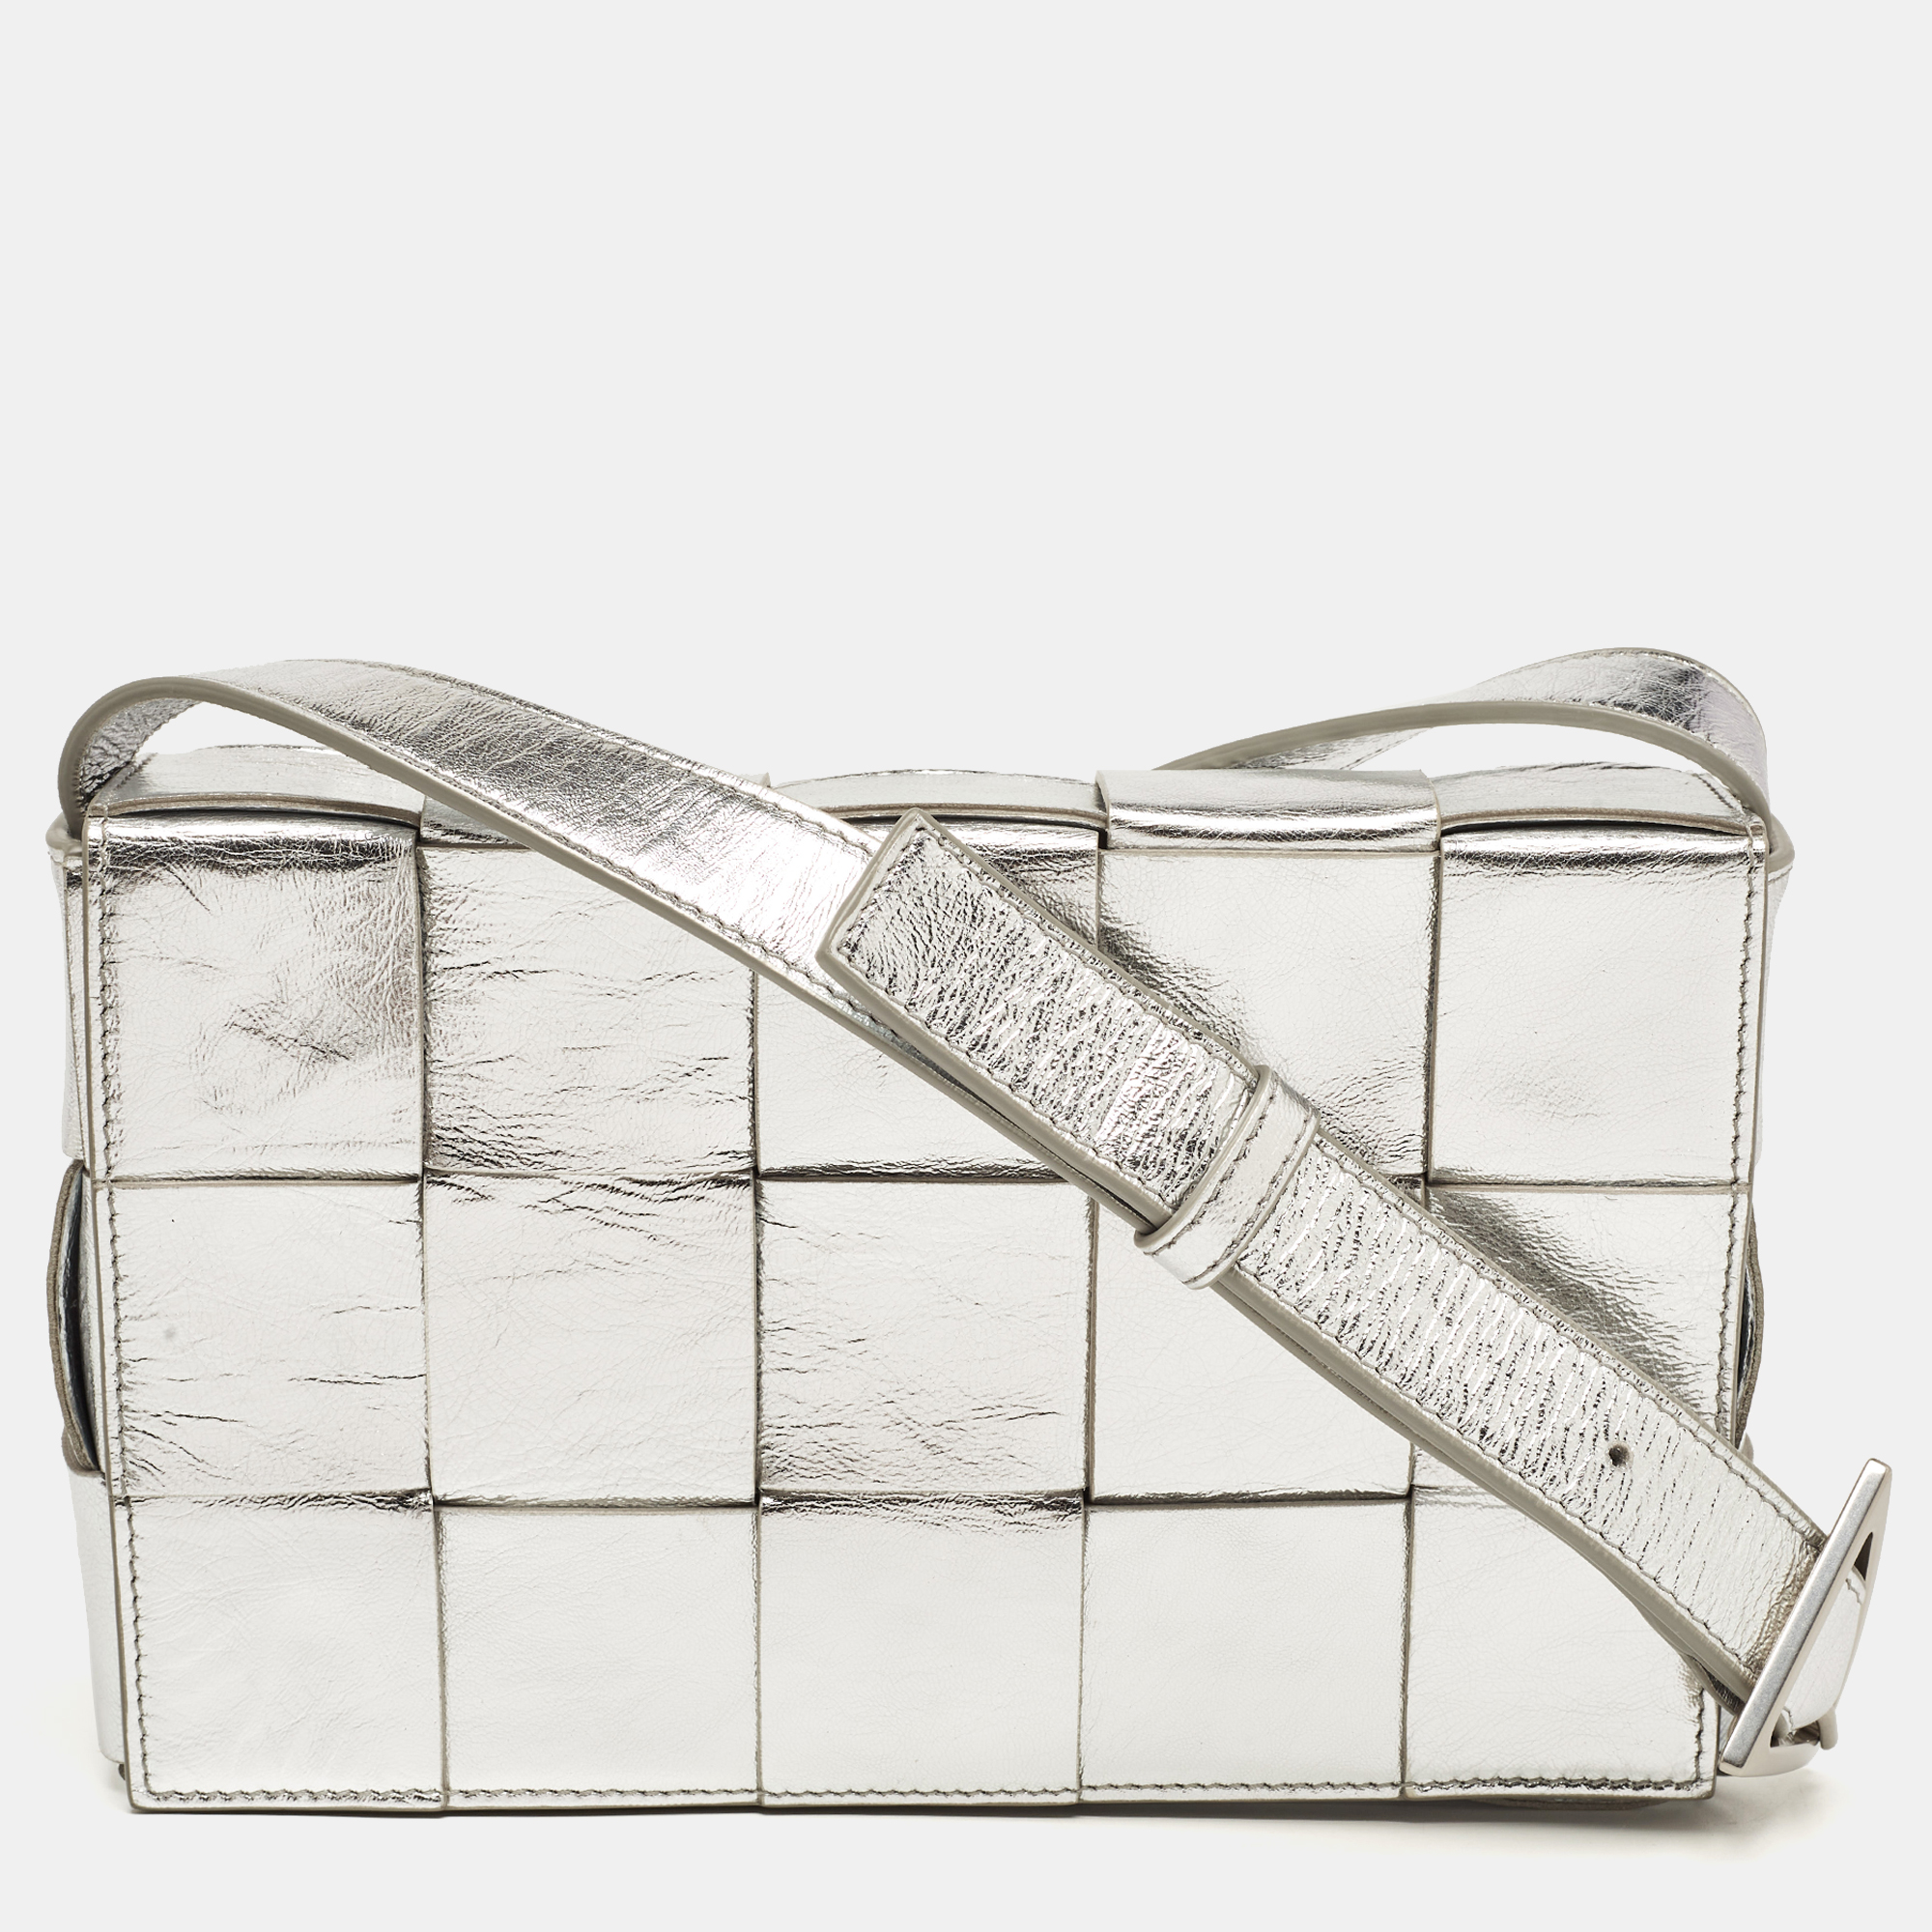 The Cassette bag by Bottega Veneta is all things stylish trendy and instagrammable. With its playful take on the brands signature house code the Intrecciato weave the bags exterior flaunts a maxi version of the weave. It is crafted from quality leather in a lovely shade of silver. The front flap opens gracefully to an interior sized perfectly to carry your essentials.